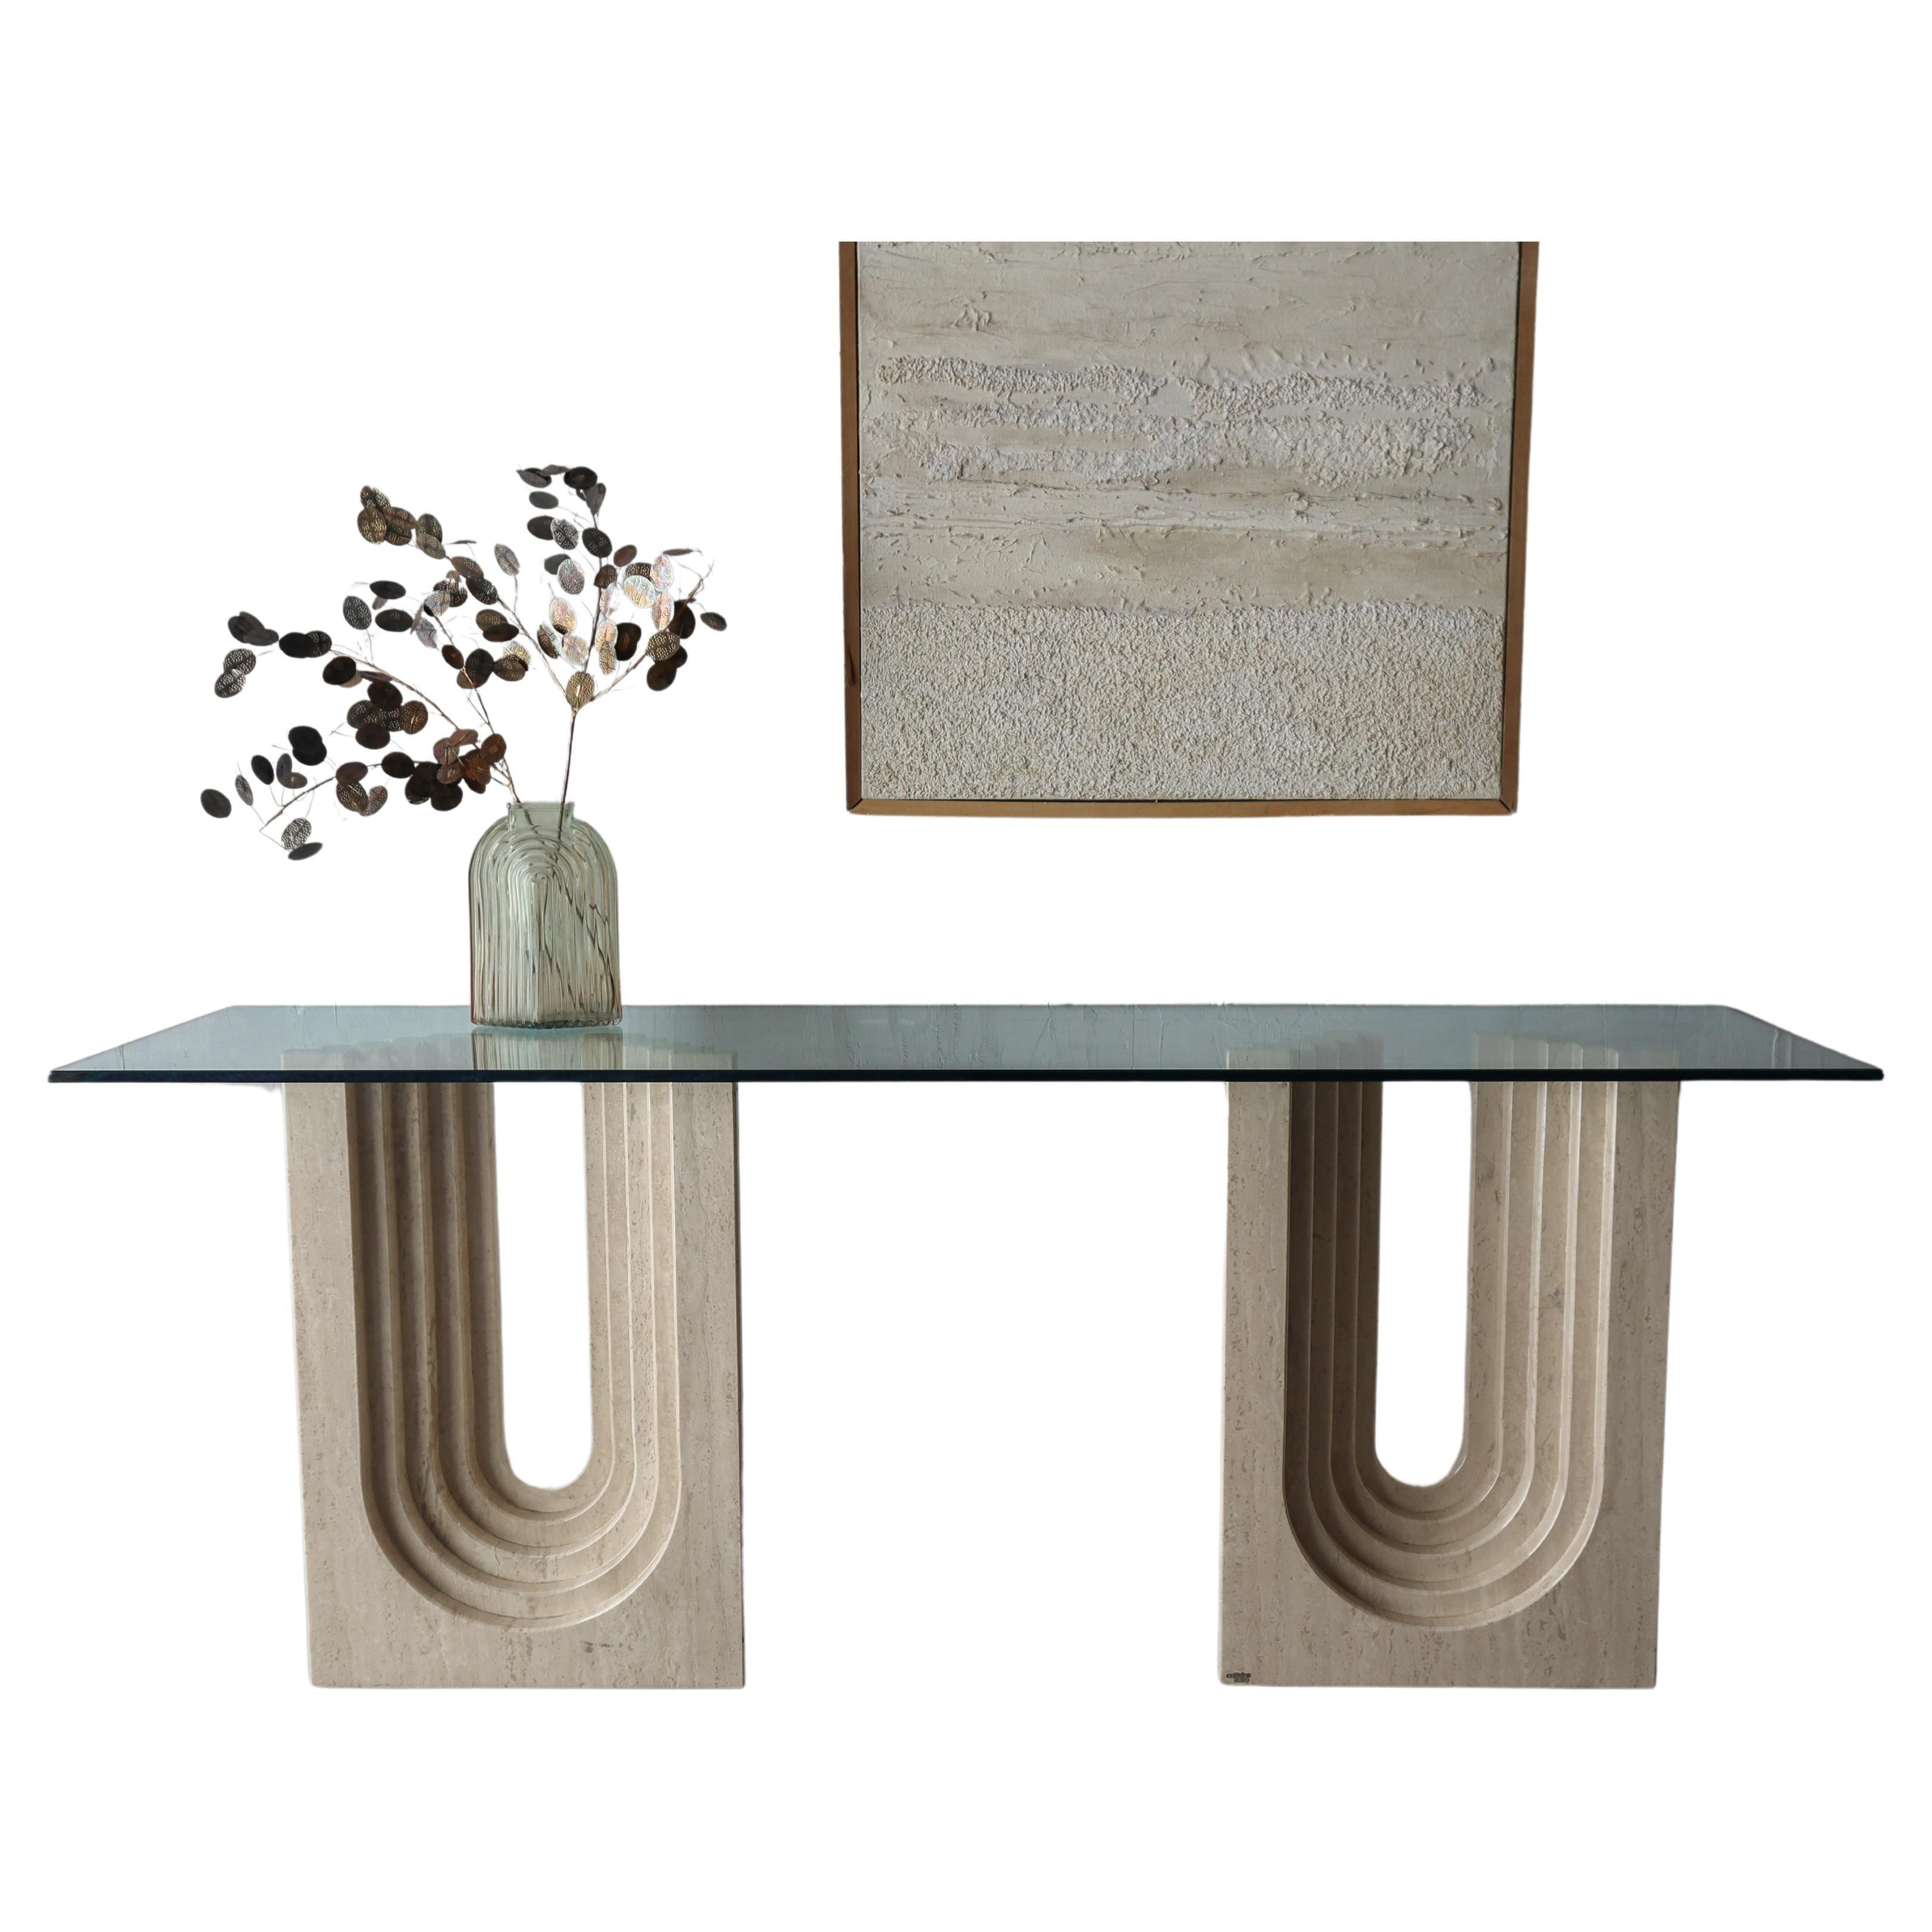 Polished Arched Travertine Pedestals by Carlo Scarpa For Sale